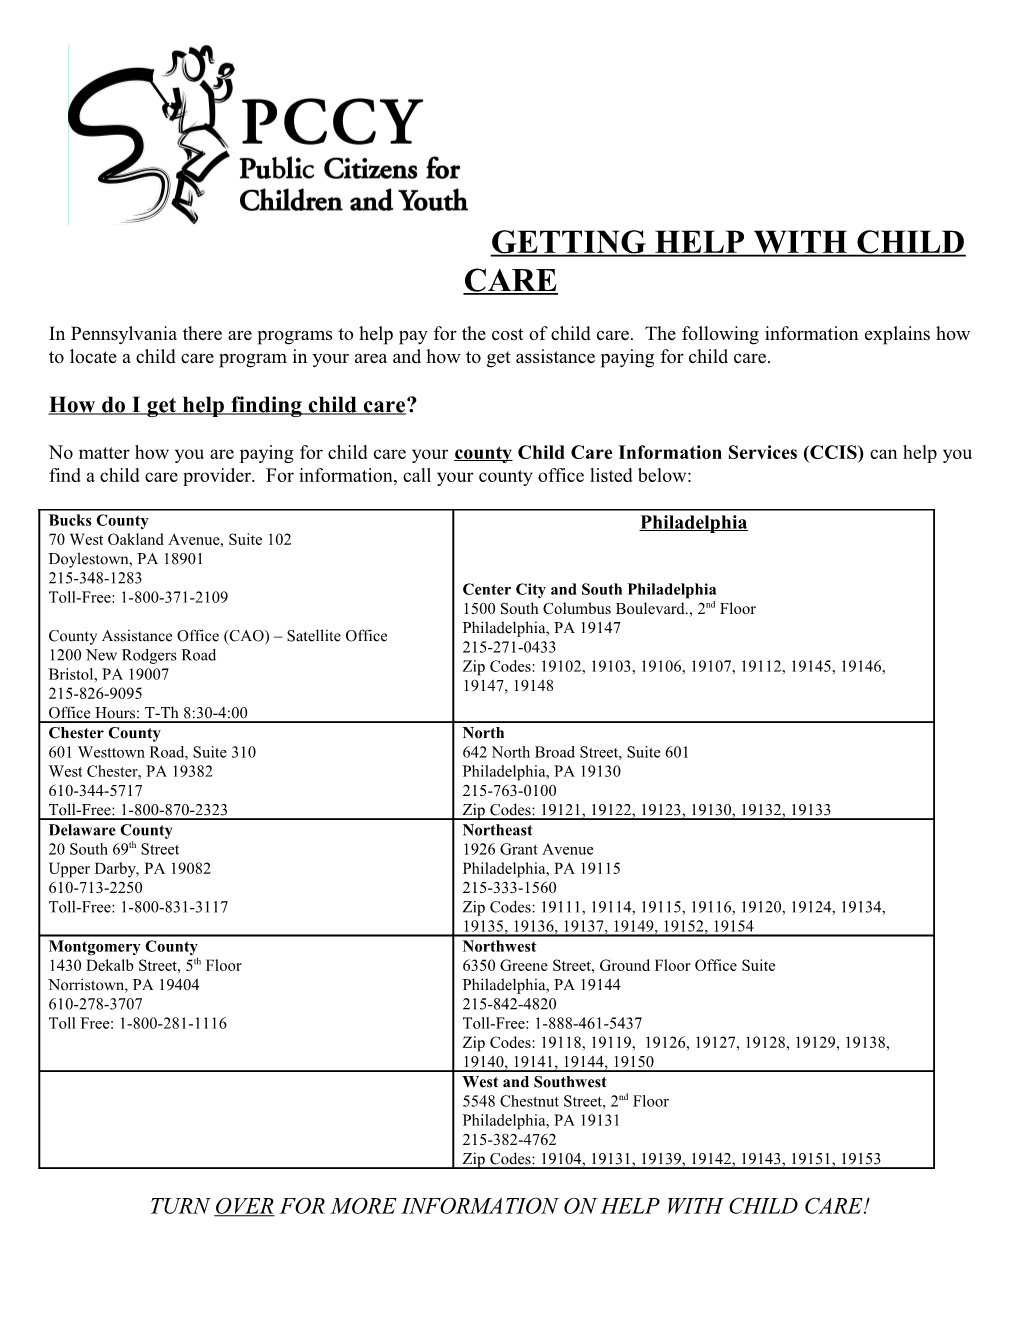 Getting Help with Child Care